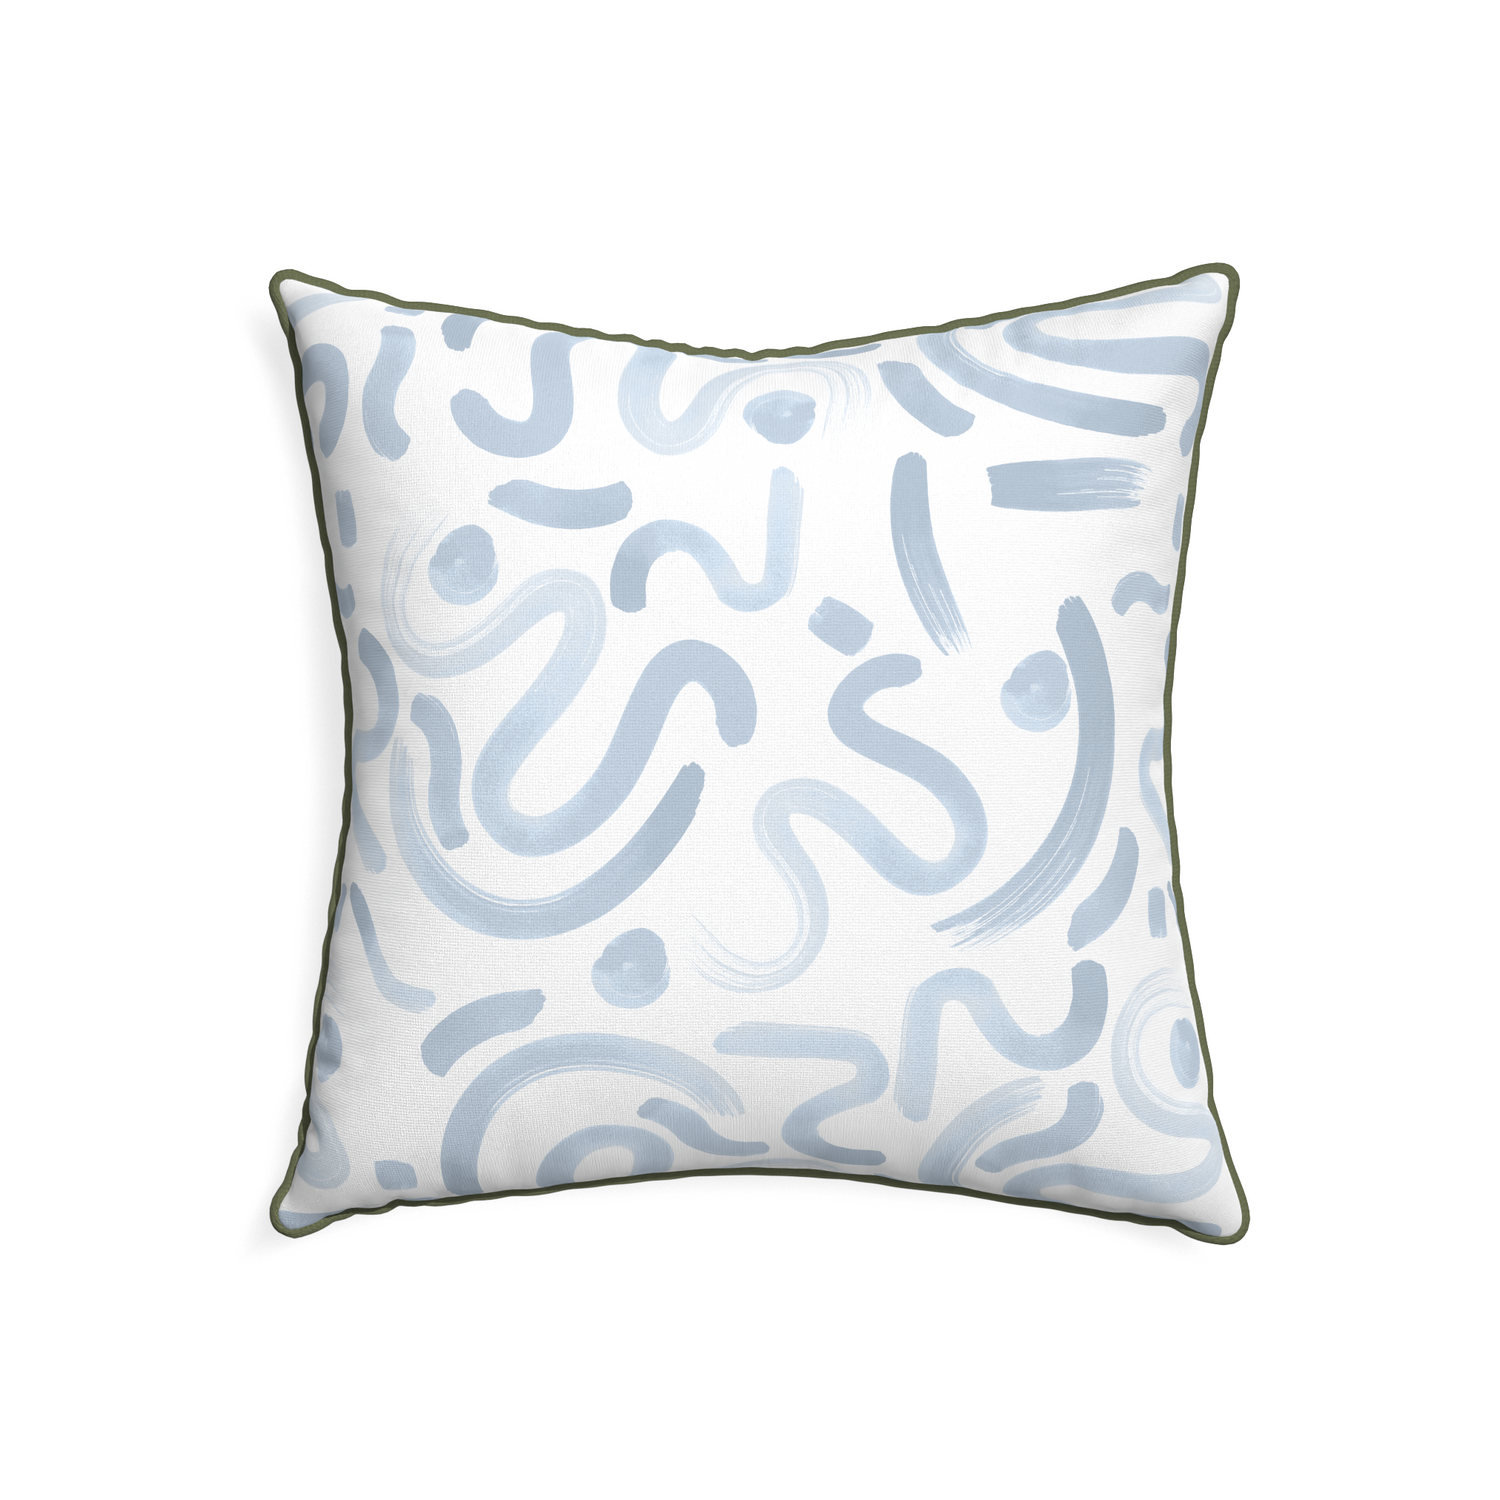 22-square hockney sky custom pillow with f piping on white background